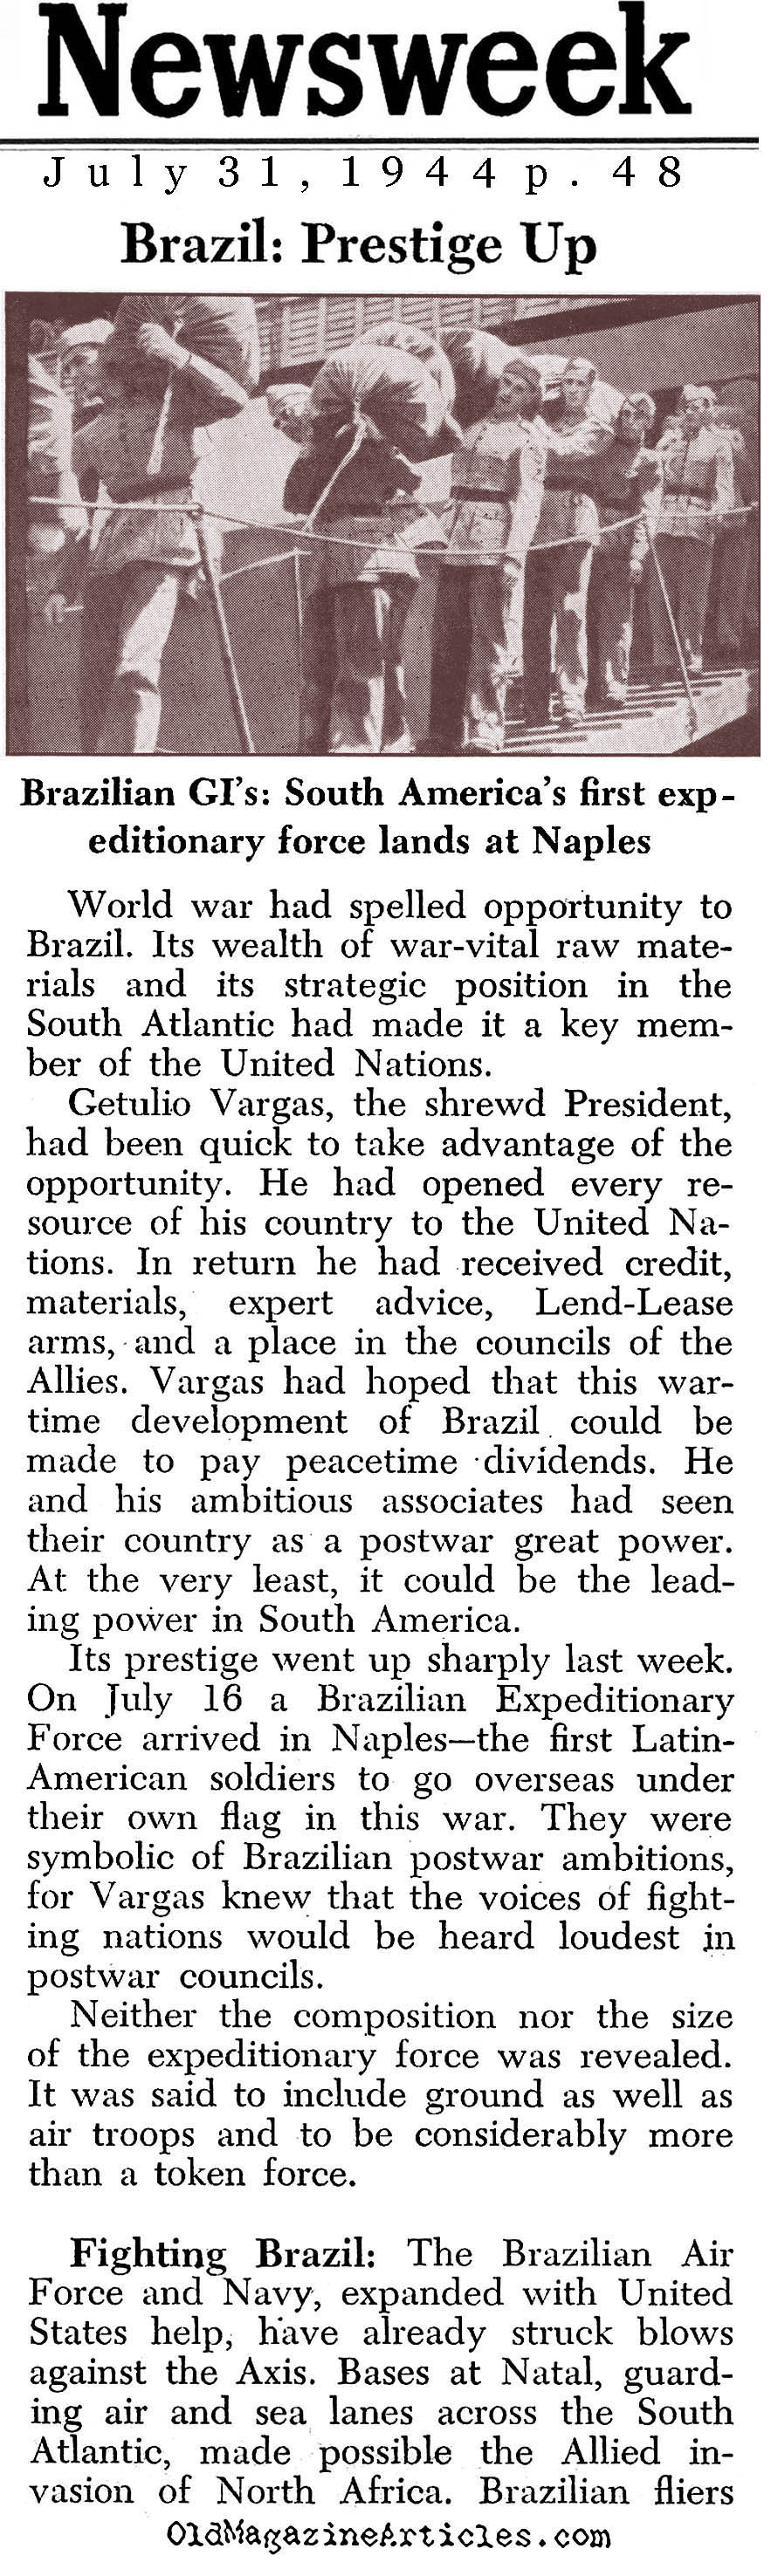 With the Brazilians in Italy (Newsweek & Yank Magazines, 1944)